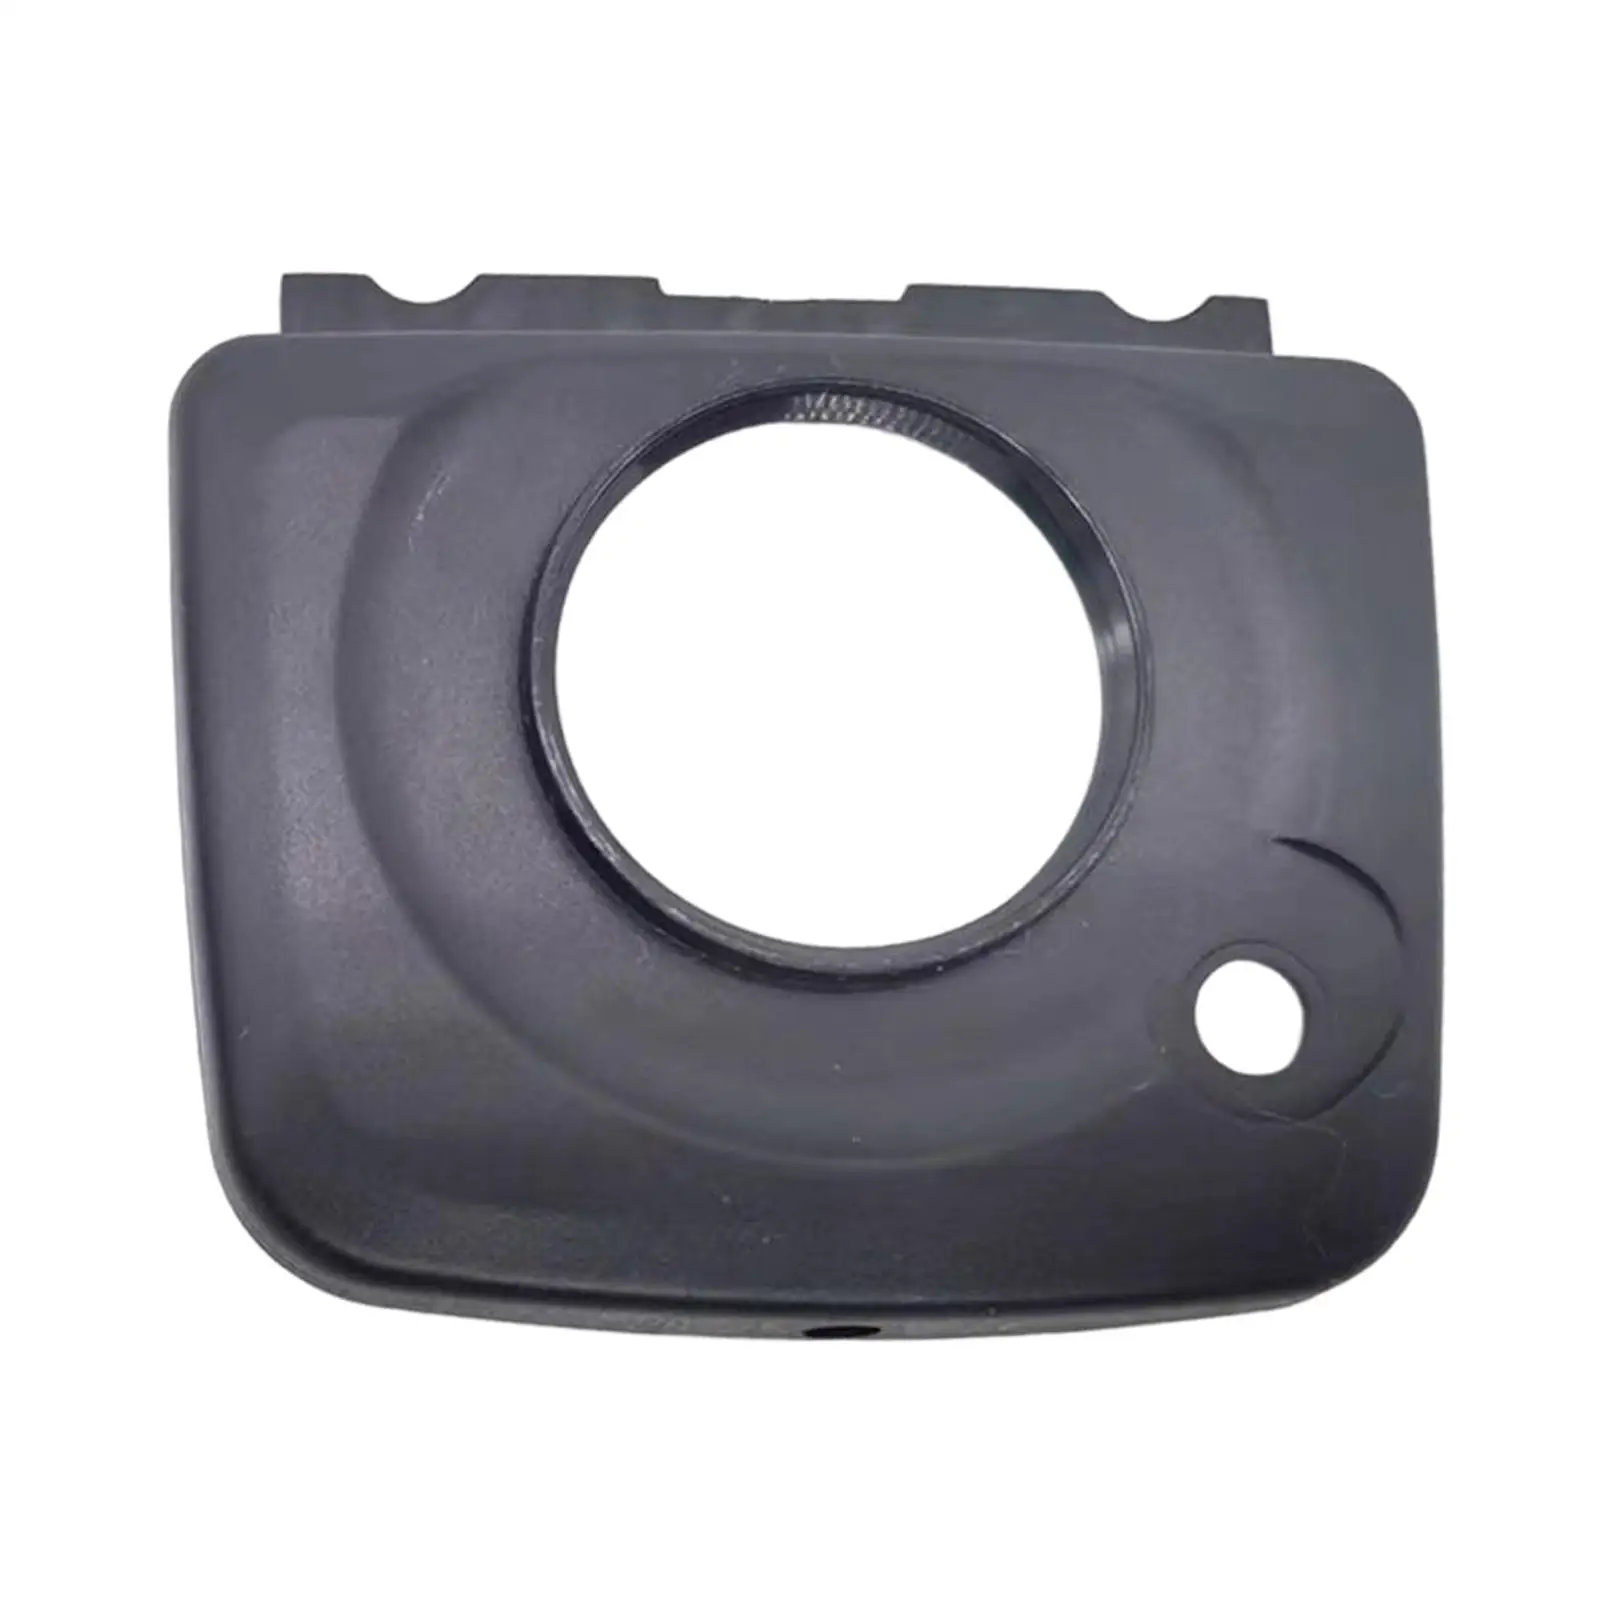 Professional Viewfinder Frame Accessory Black Durable Eyepiece Cover for D810 Camera Repair Part